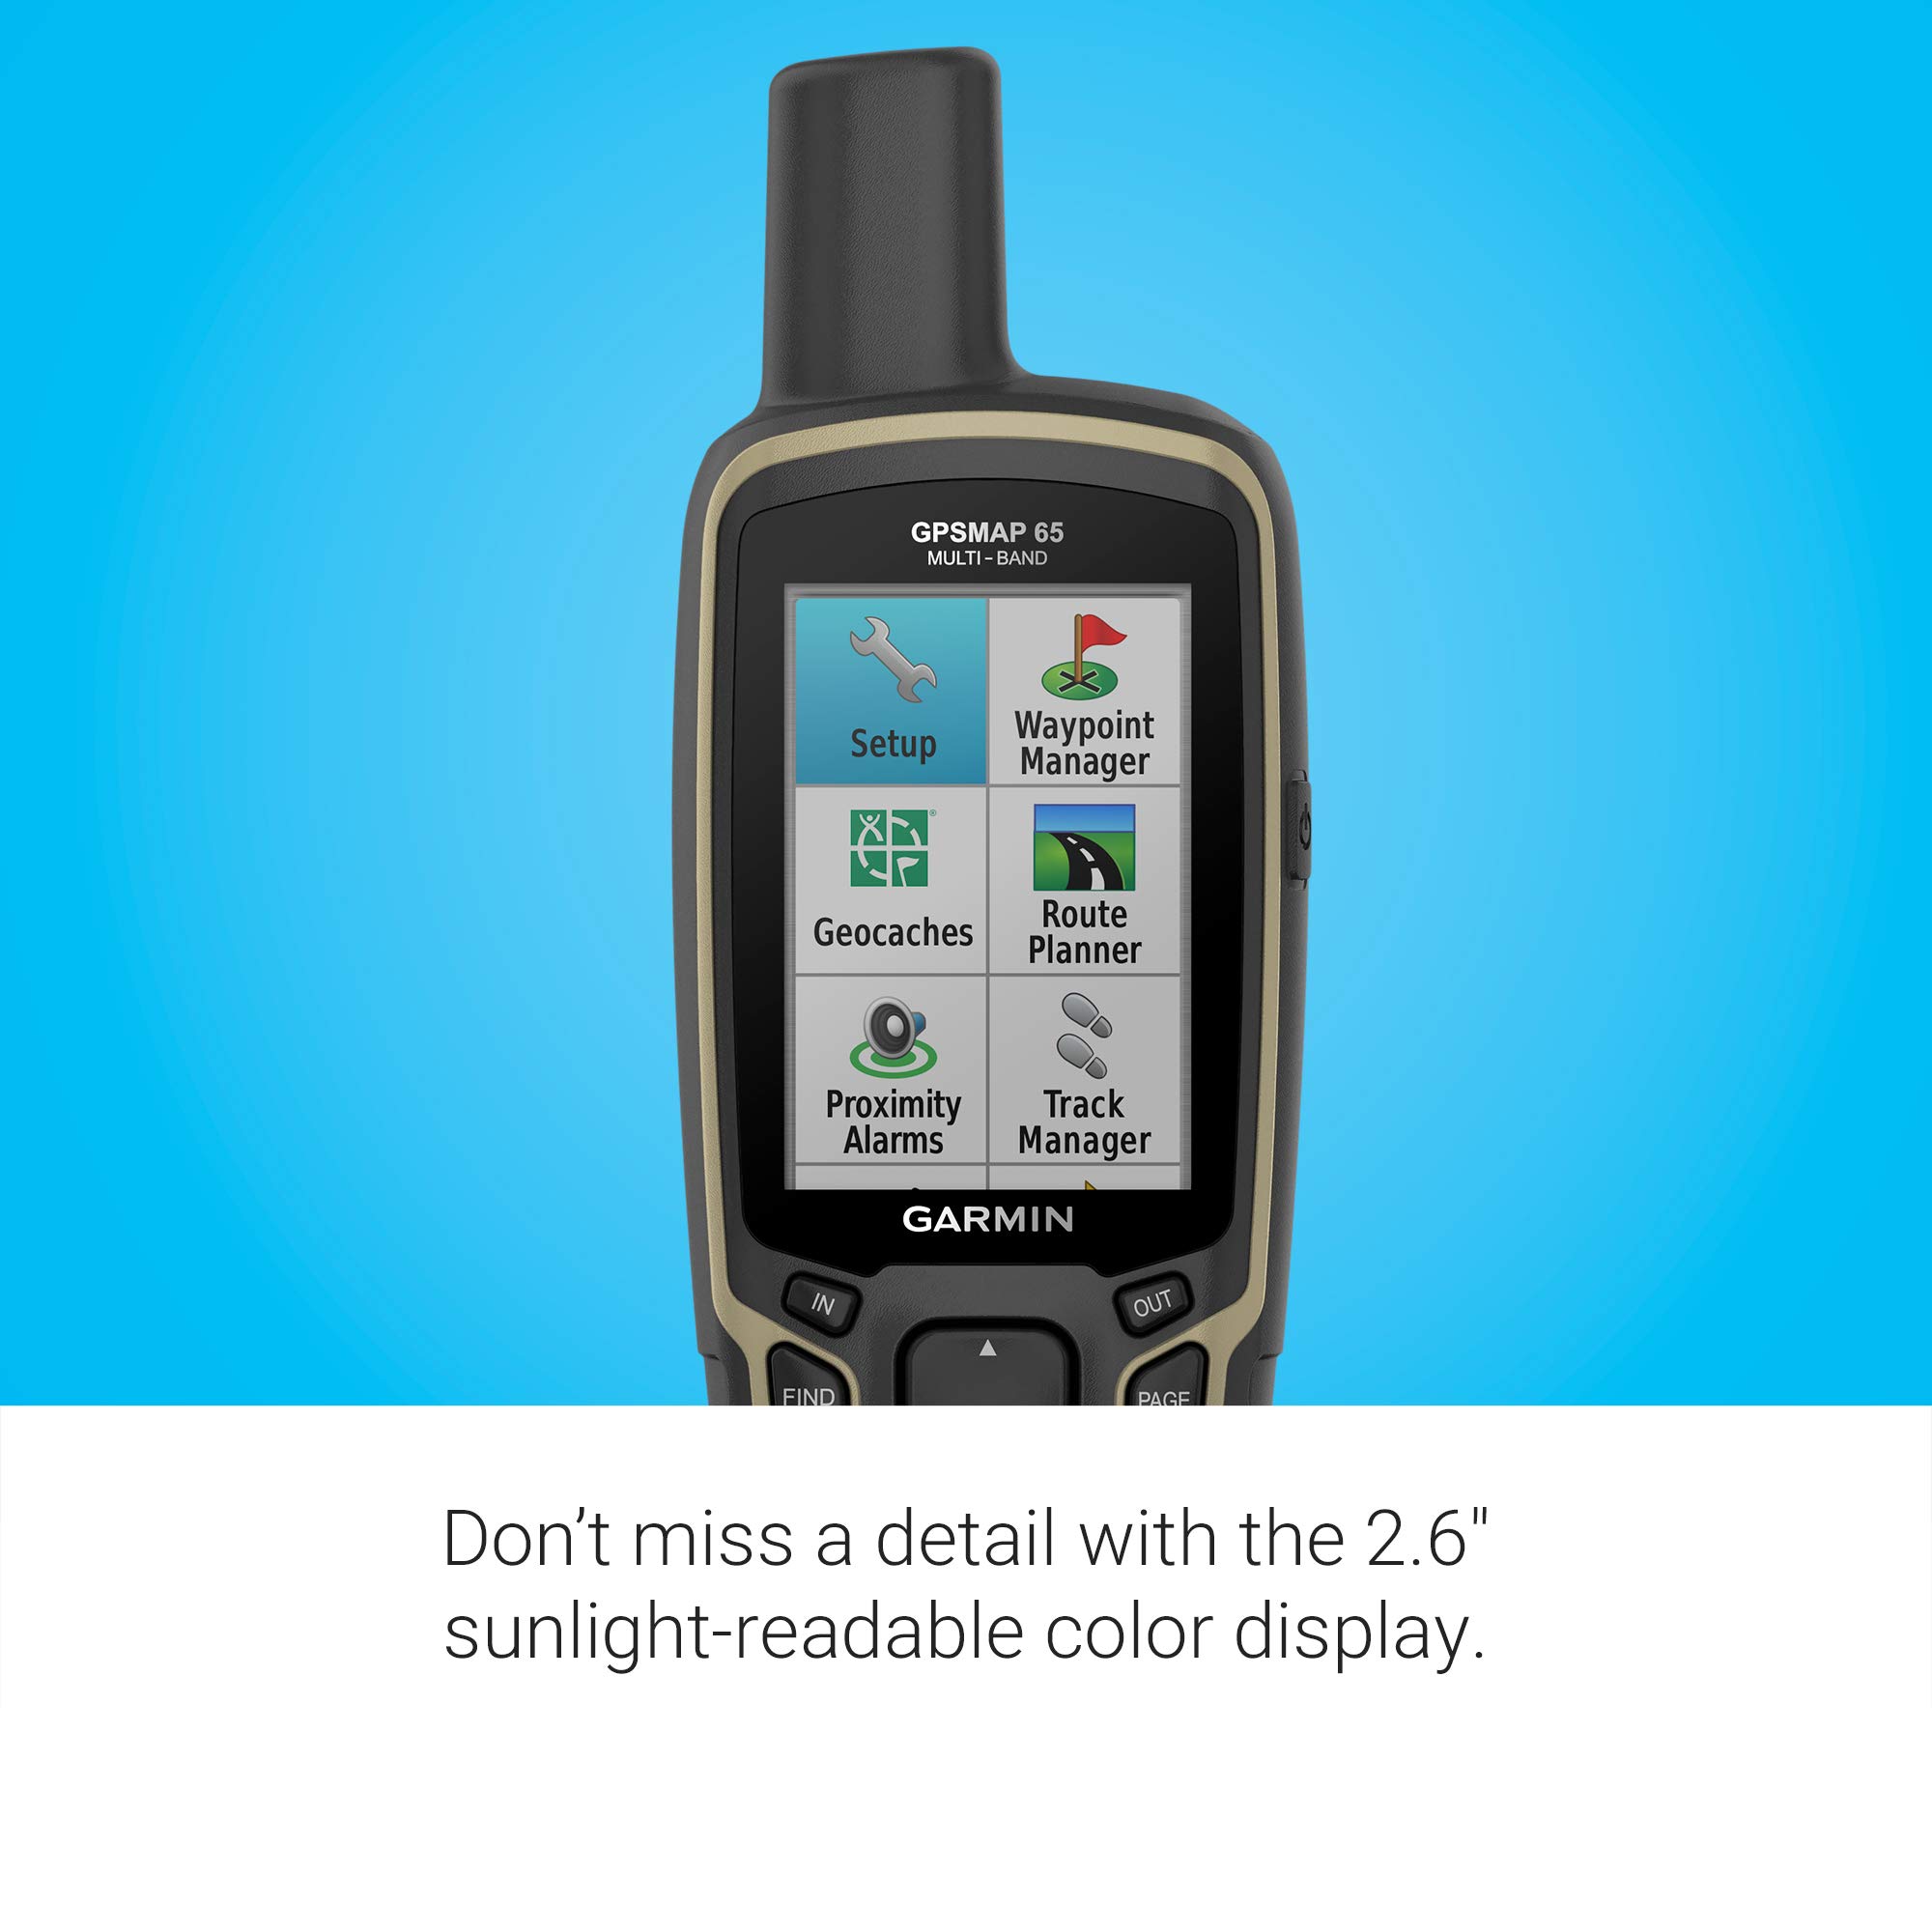 Garmin GPSMAP 65, Button-Operated Handheld with Expanded Satellite Support and Multi-Band Technology, 2.6